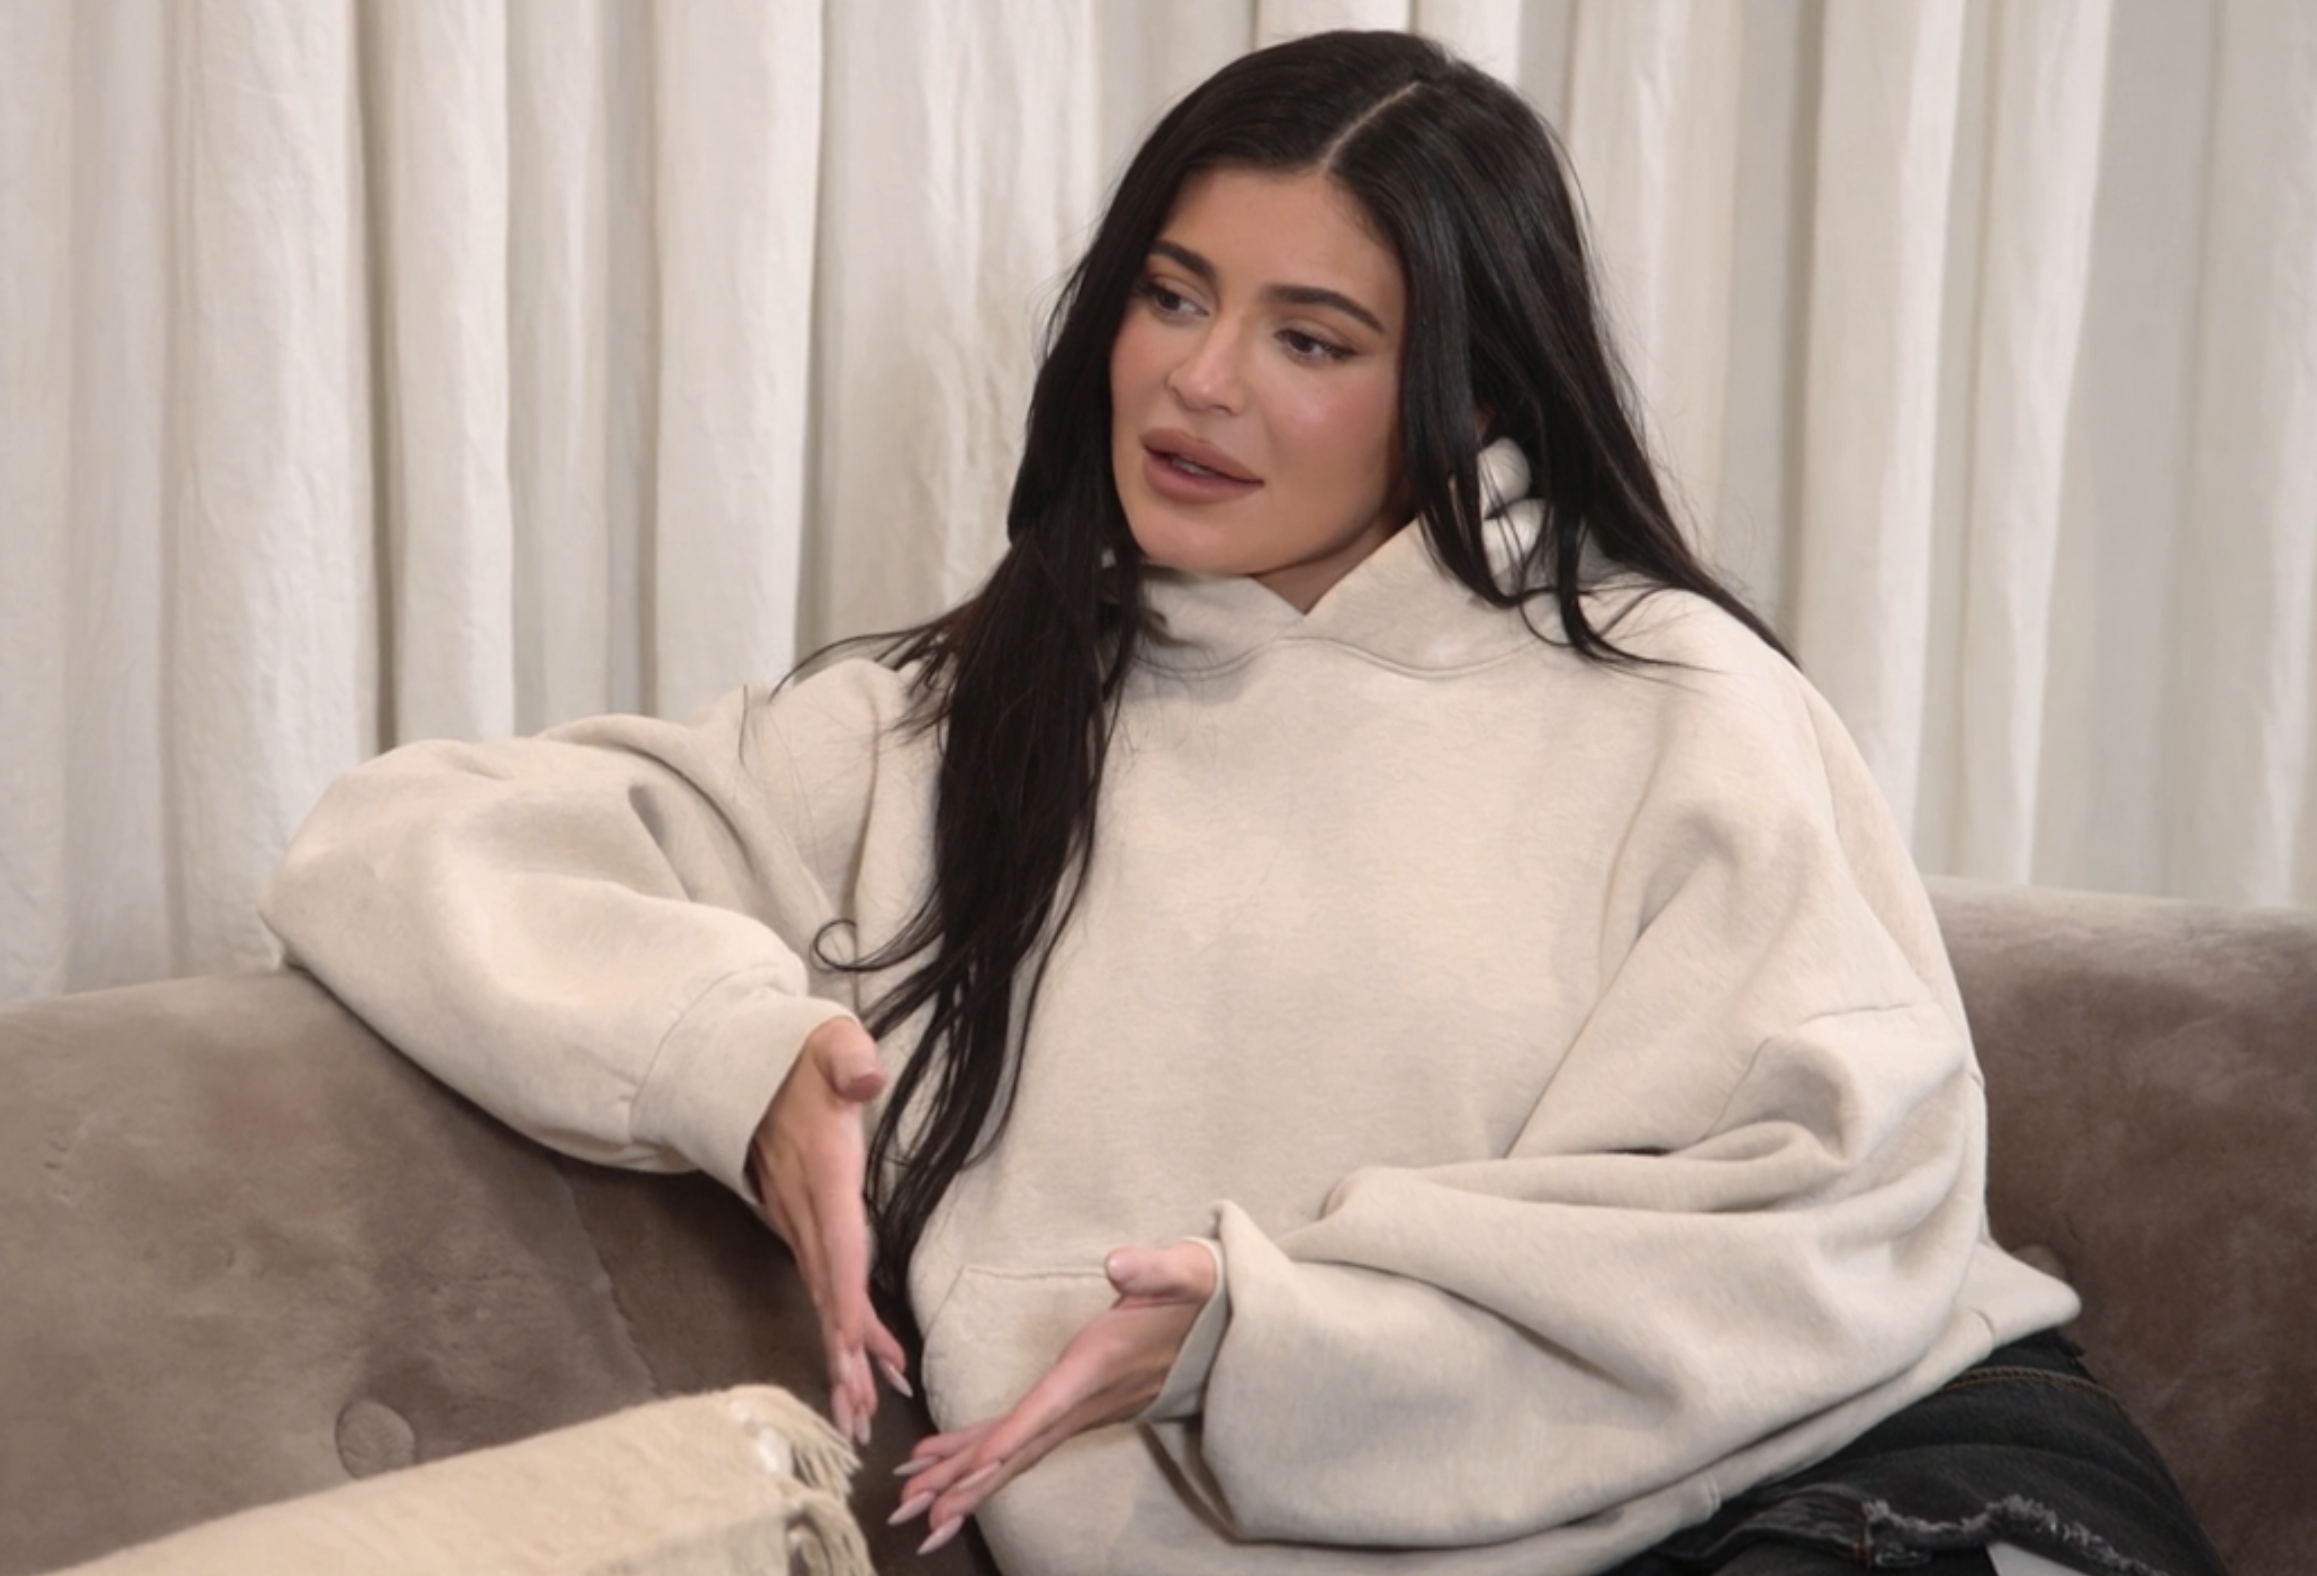 Close-up of Kylie sitting on a couch and wearing an oversize, long-sleeved hoodie